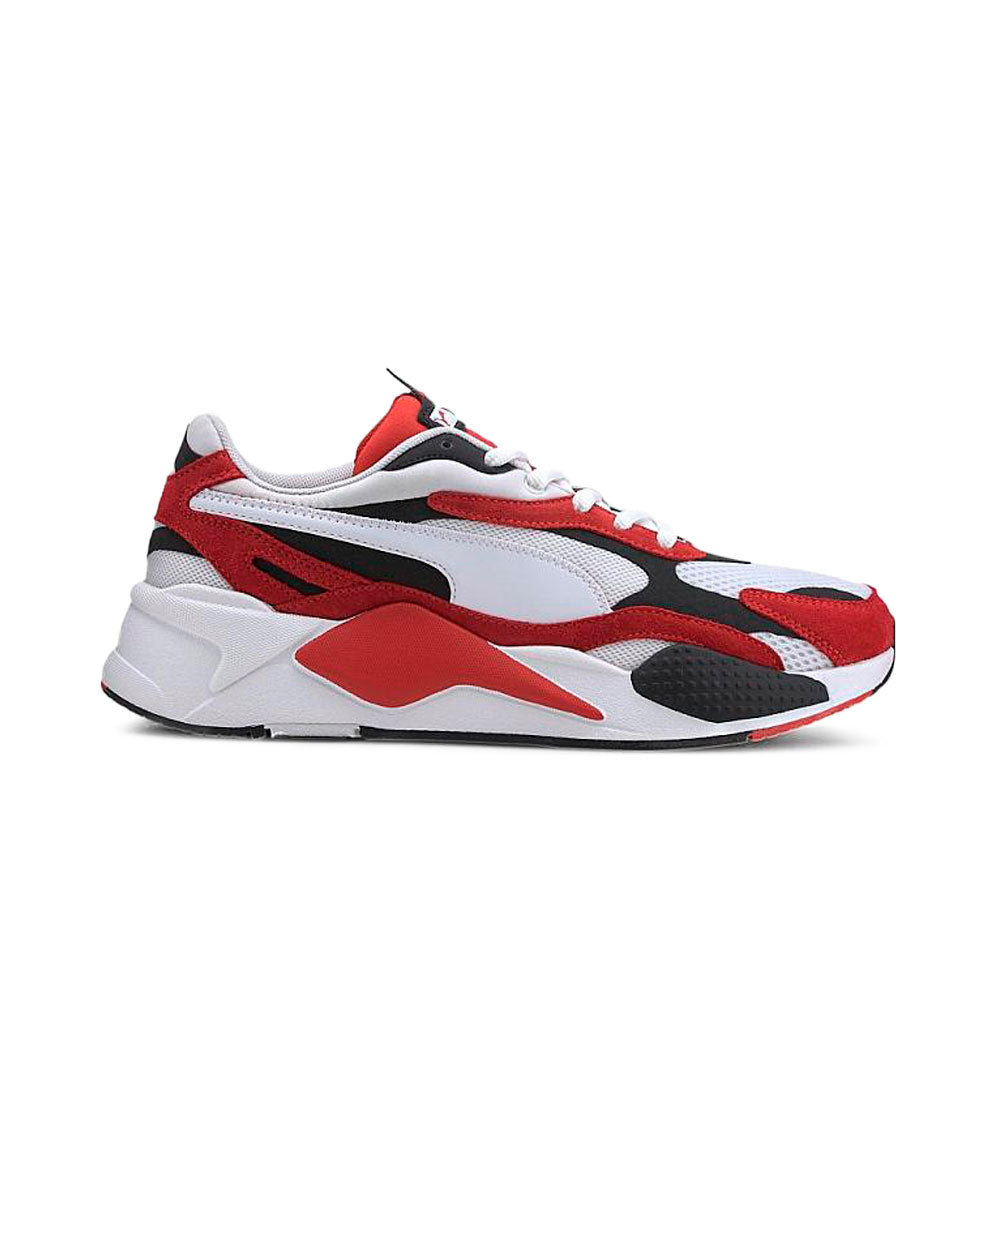 Puma RS X³ Puzzle Red